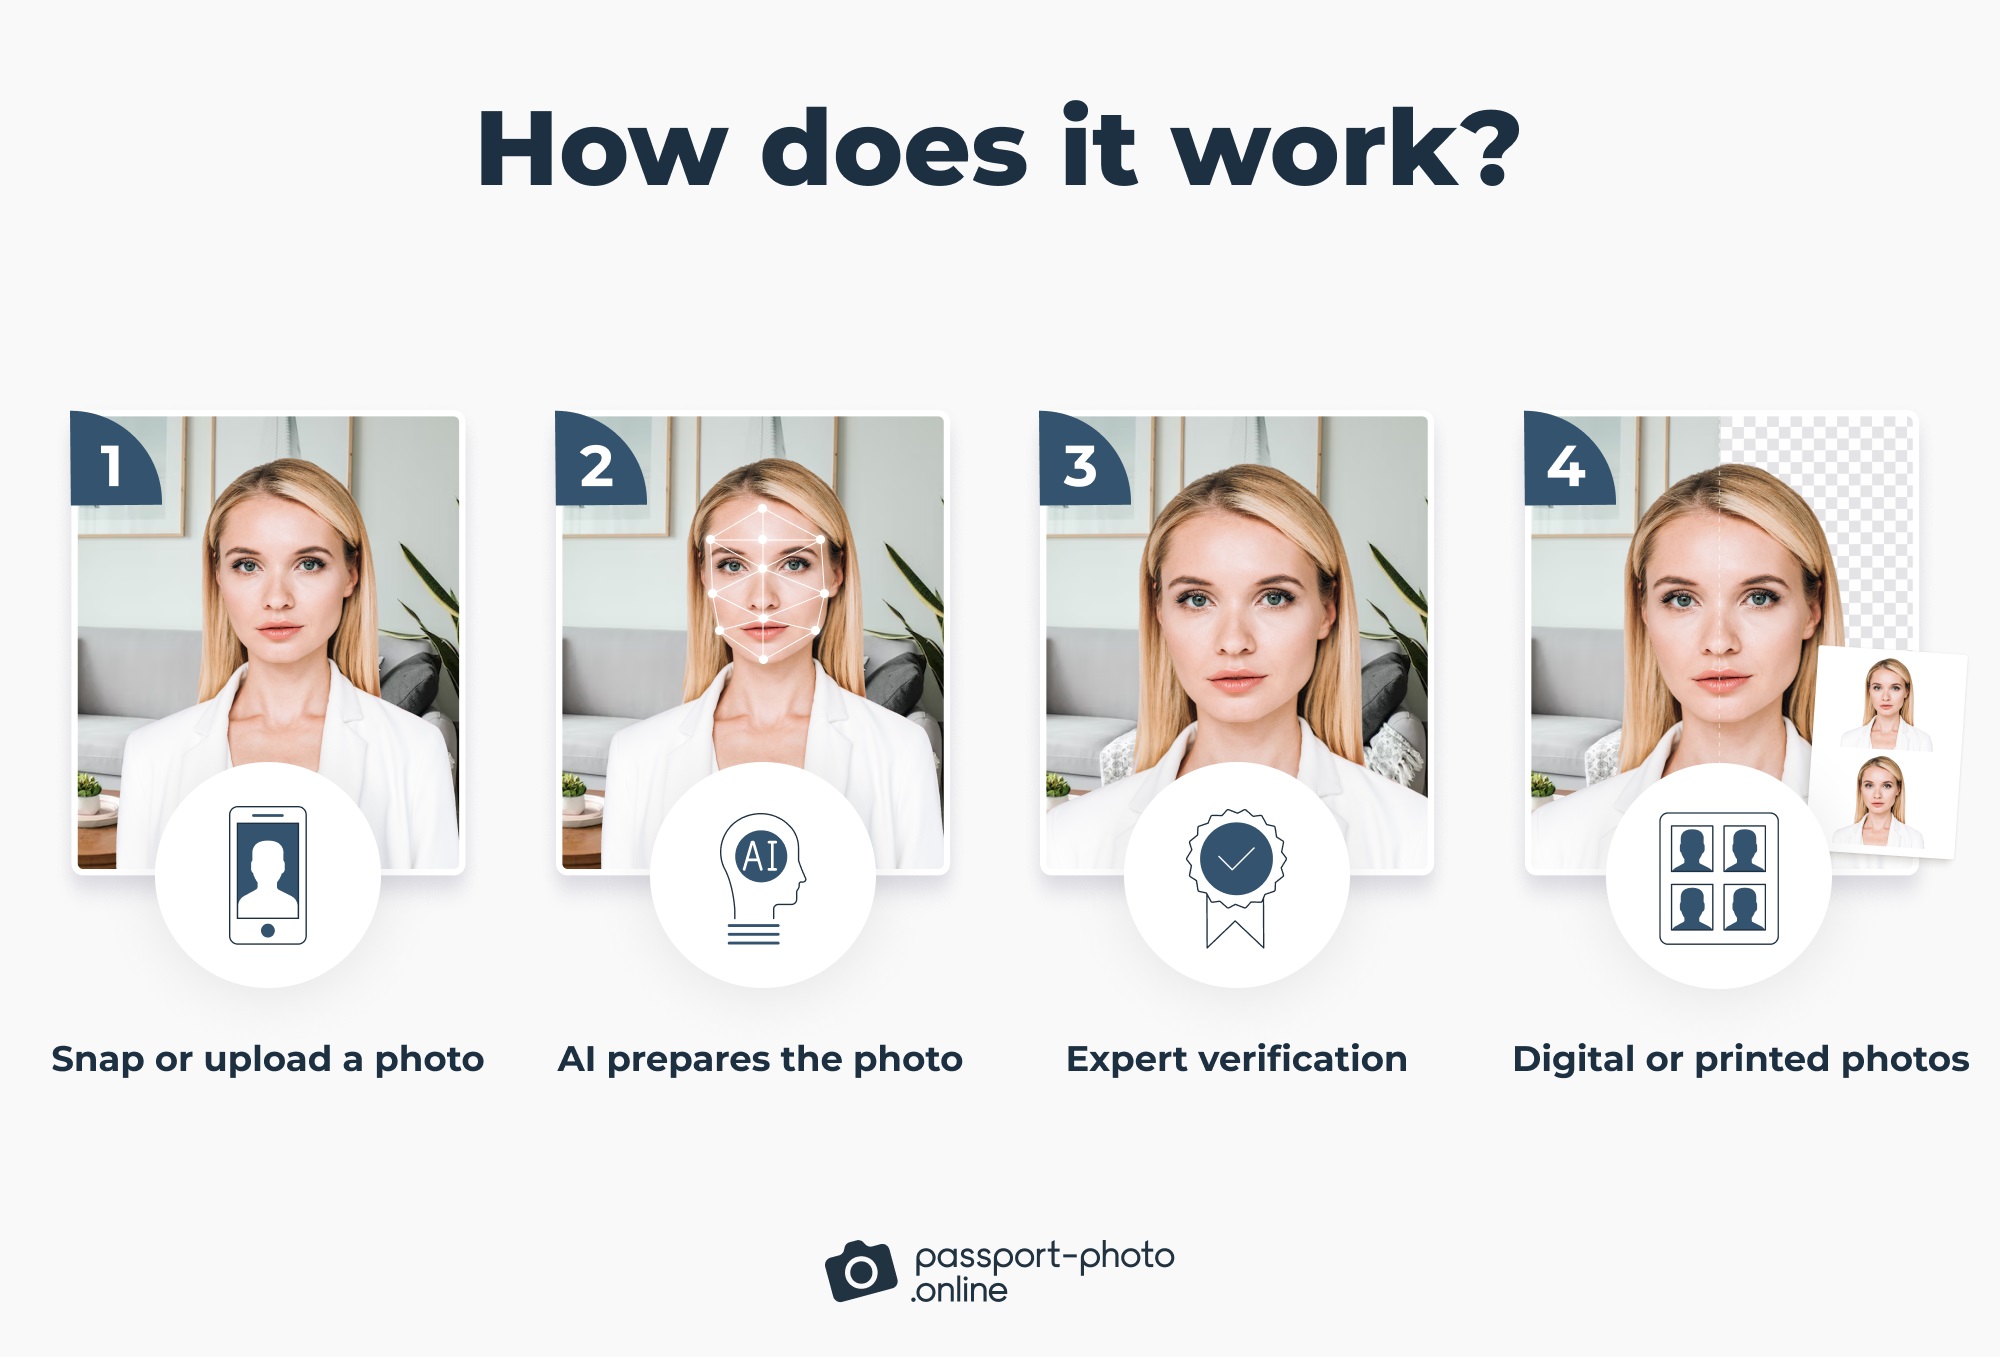 A 4-step process of getting passport photos with Passport Photo Online.